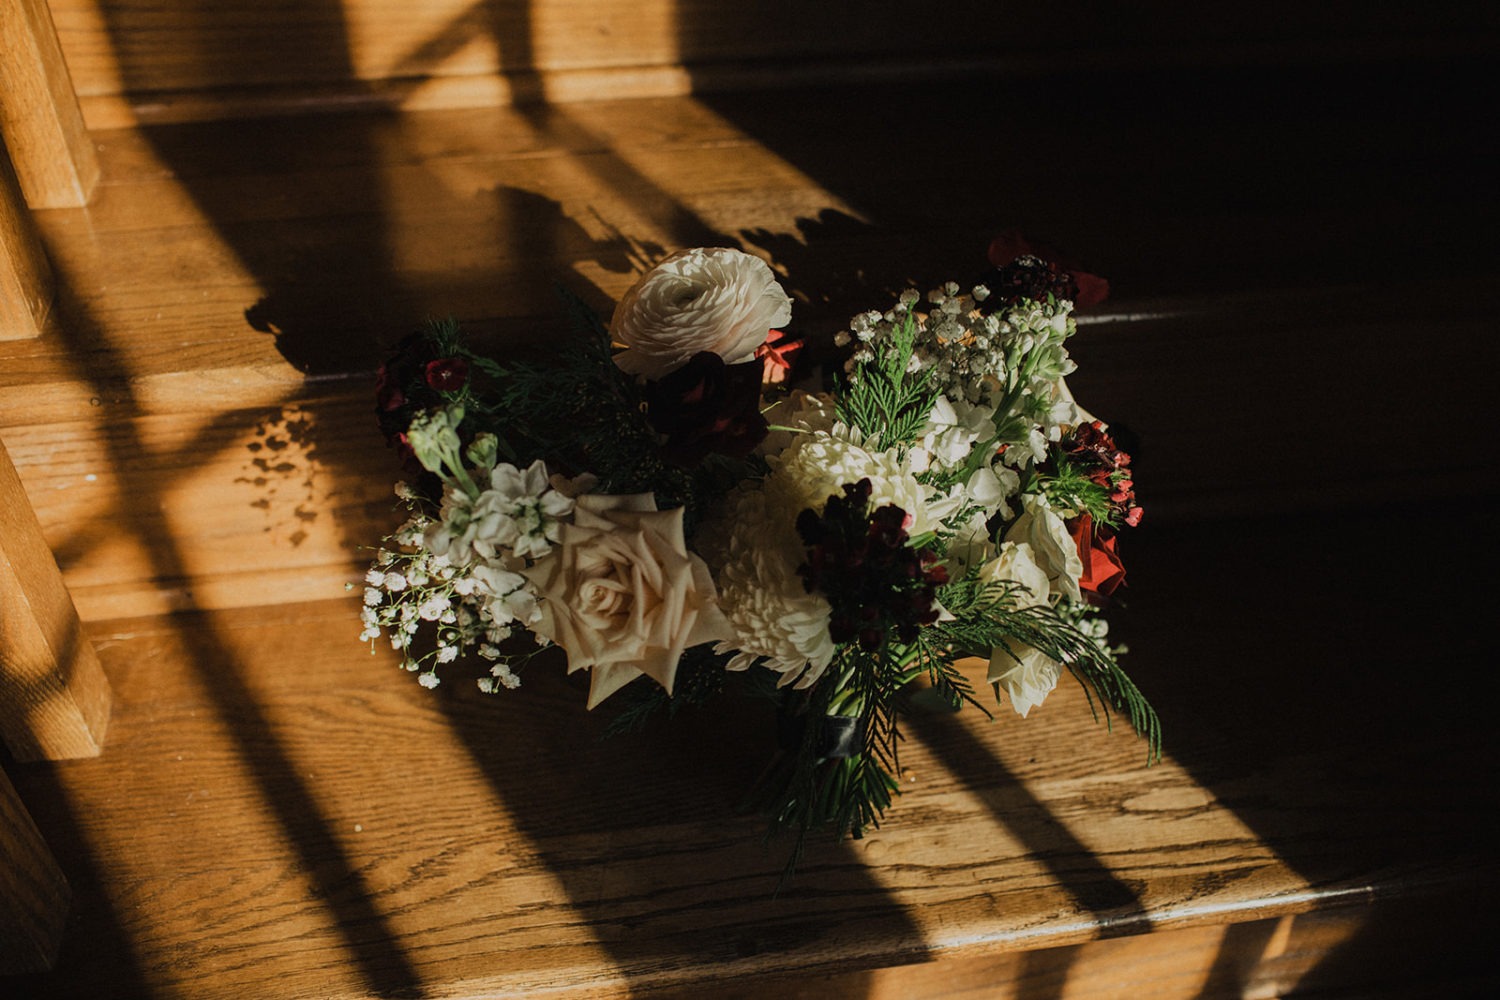 Wedding bouquet is set on steps in shadow and sunlight